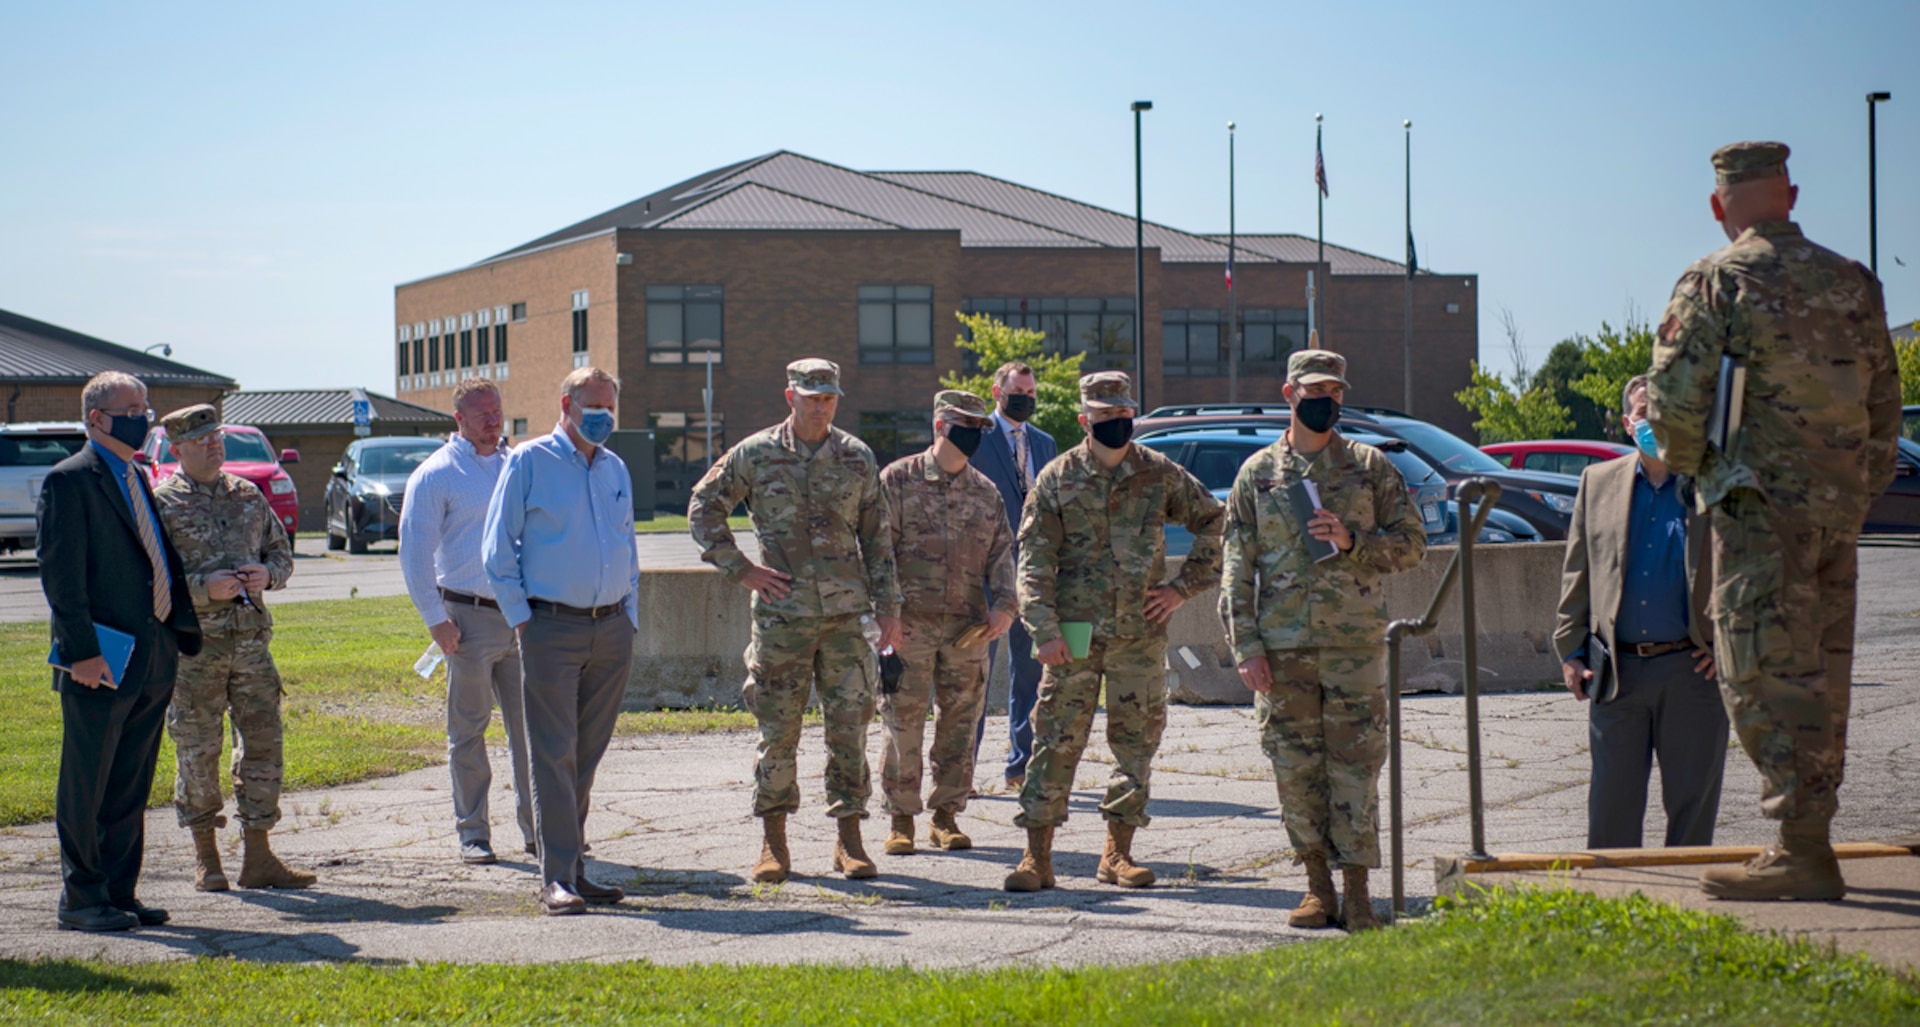 A site survey team visits the 179th Airlift Wing in Mansfield, Ohio, as part of the Air Force site selection process for a cyber warfare wing. The Air Force announced the selection of the base for the Air National Guard's first cyber wing Aug. 25, 2021.